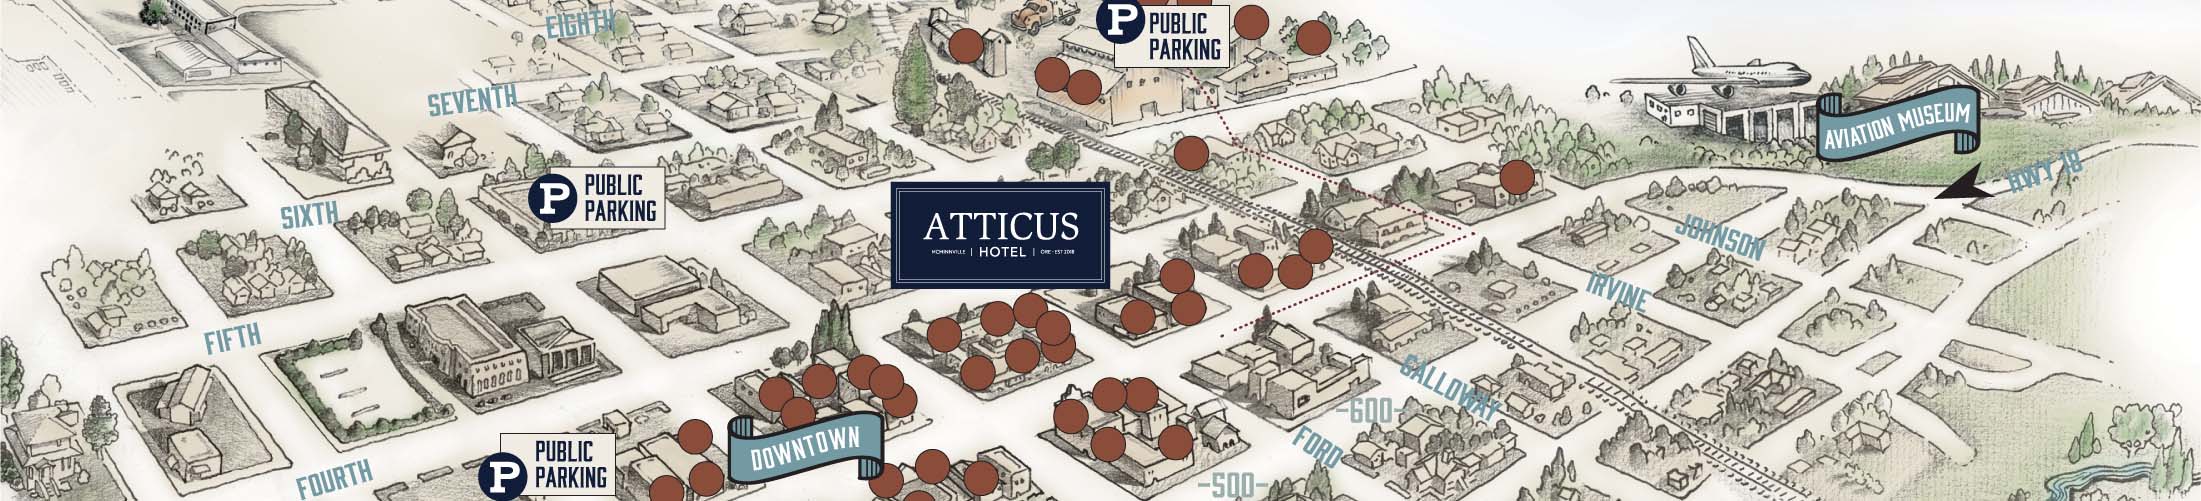 Parking map showing location of public lots in regards to Atticus Hotel.